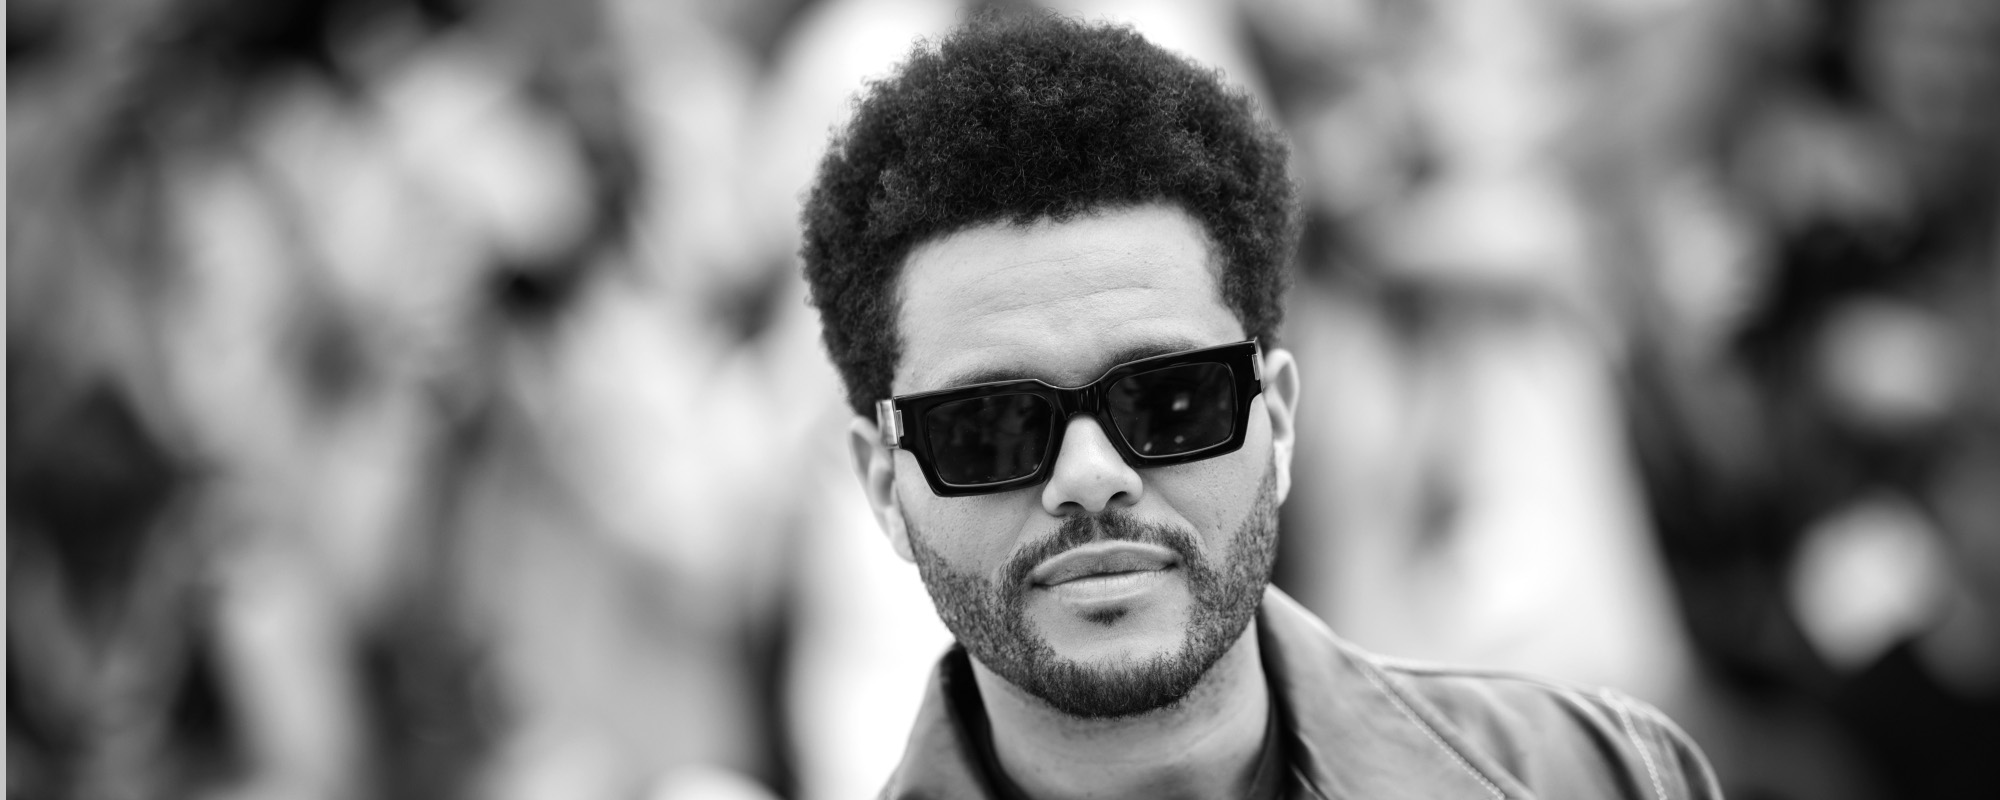 The Weeknd’s Concert in Bogotá Causes Surge in City’s Economy